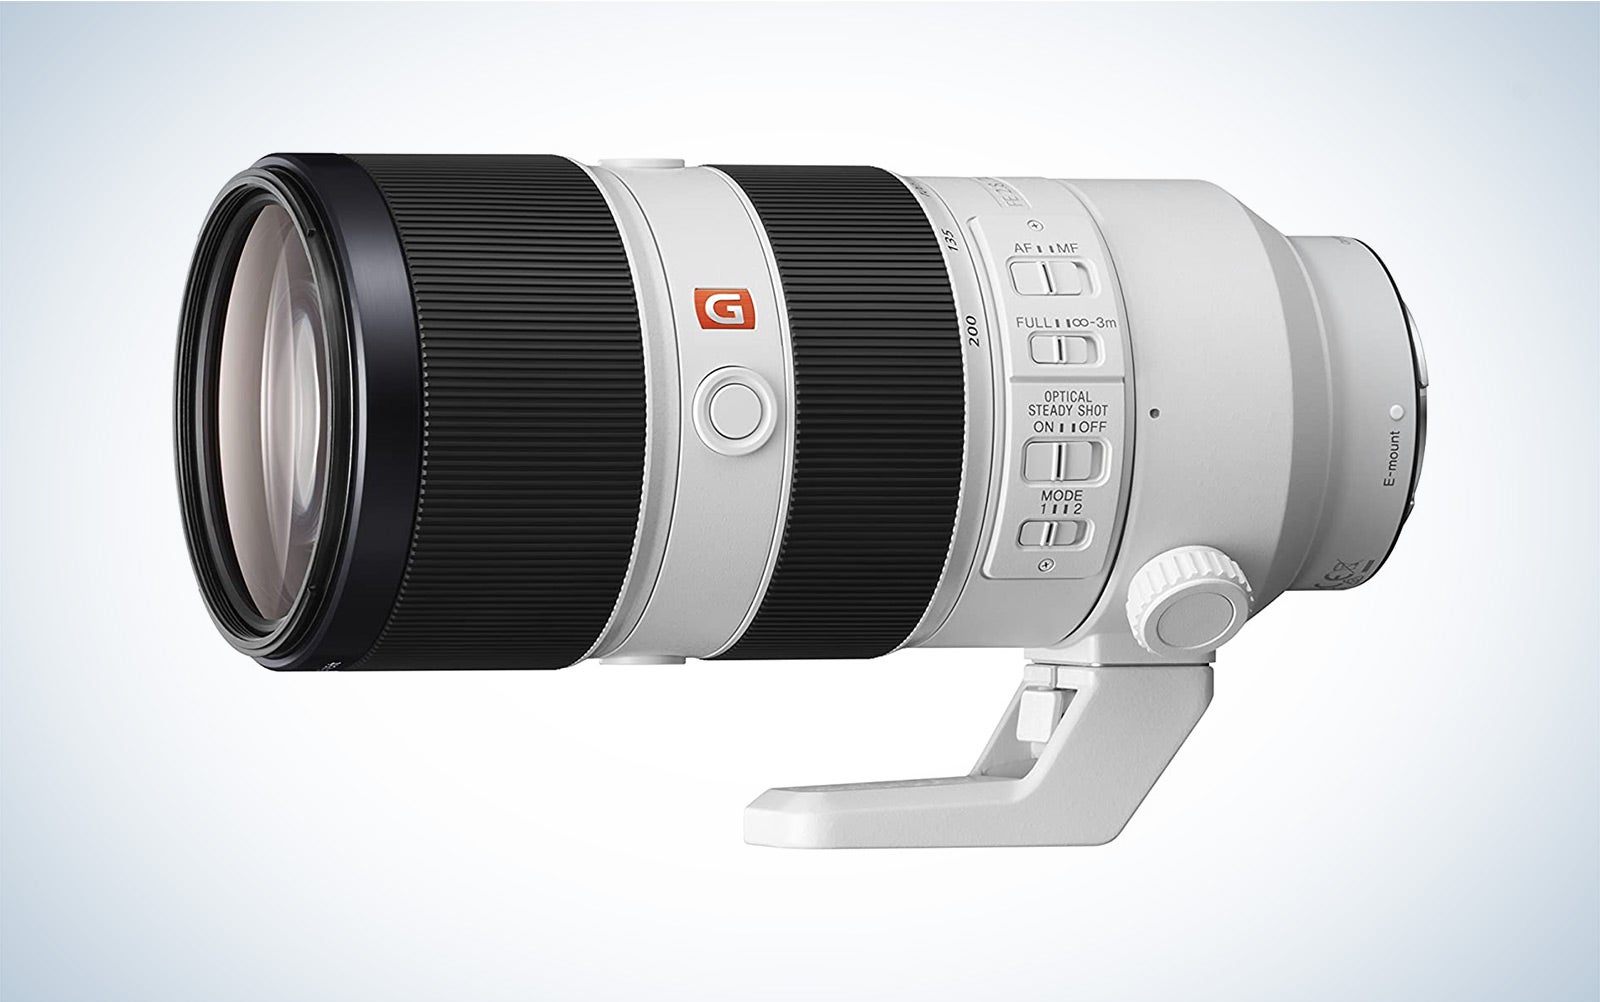 Sony's 70-200mm f/2.8 is the best telephoto for Sony cameras.